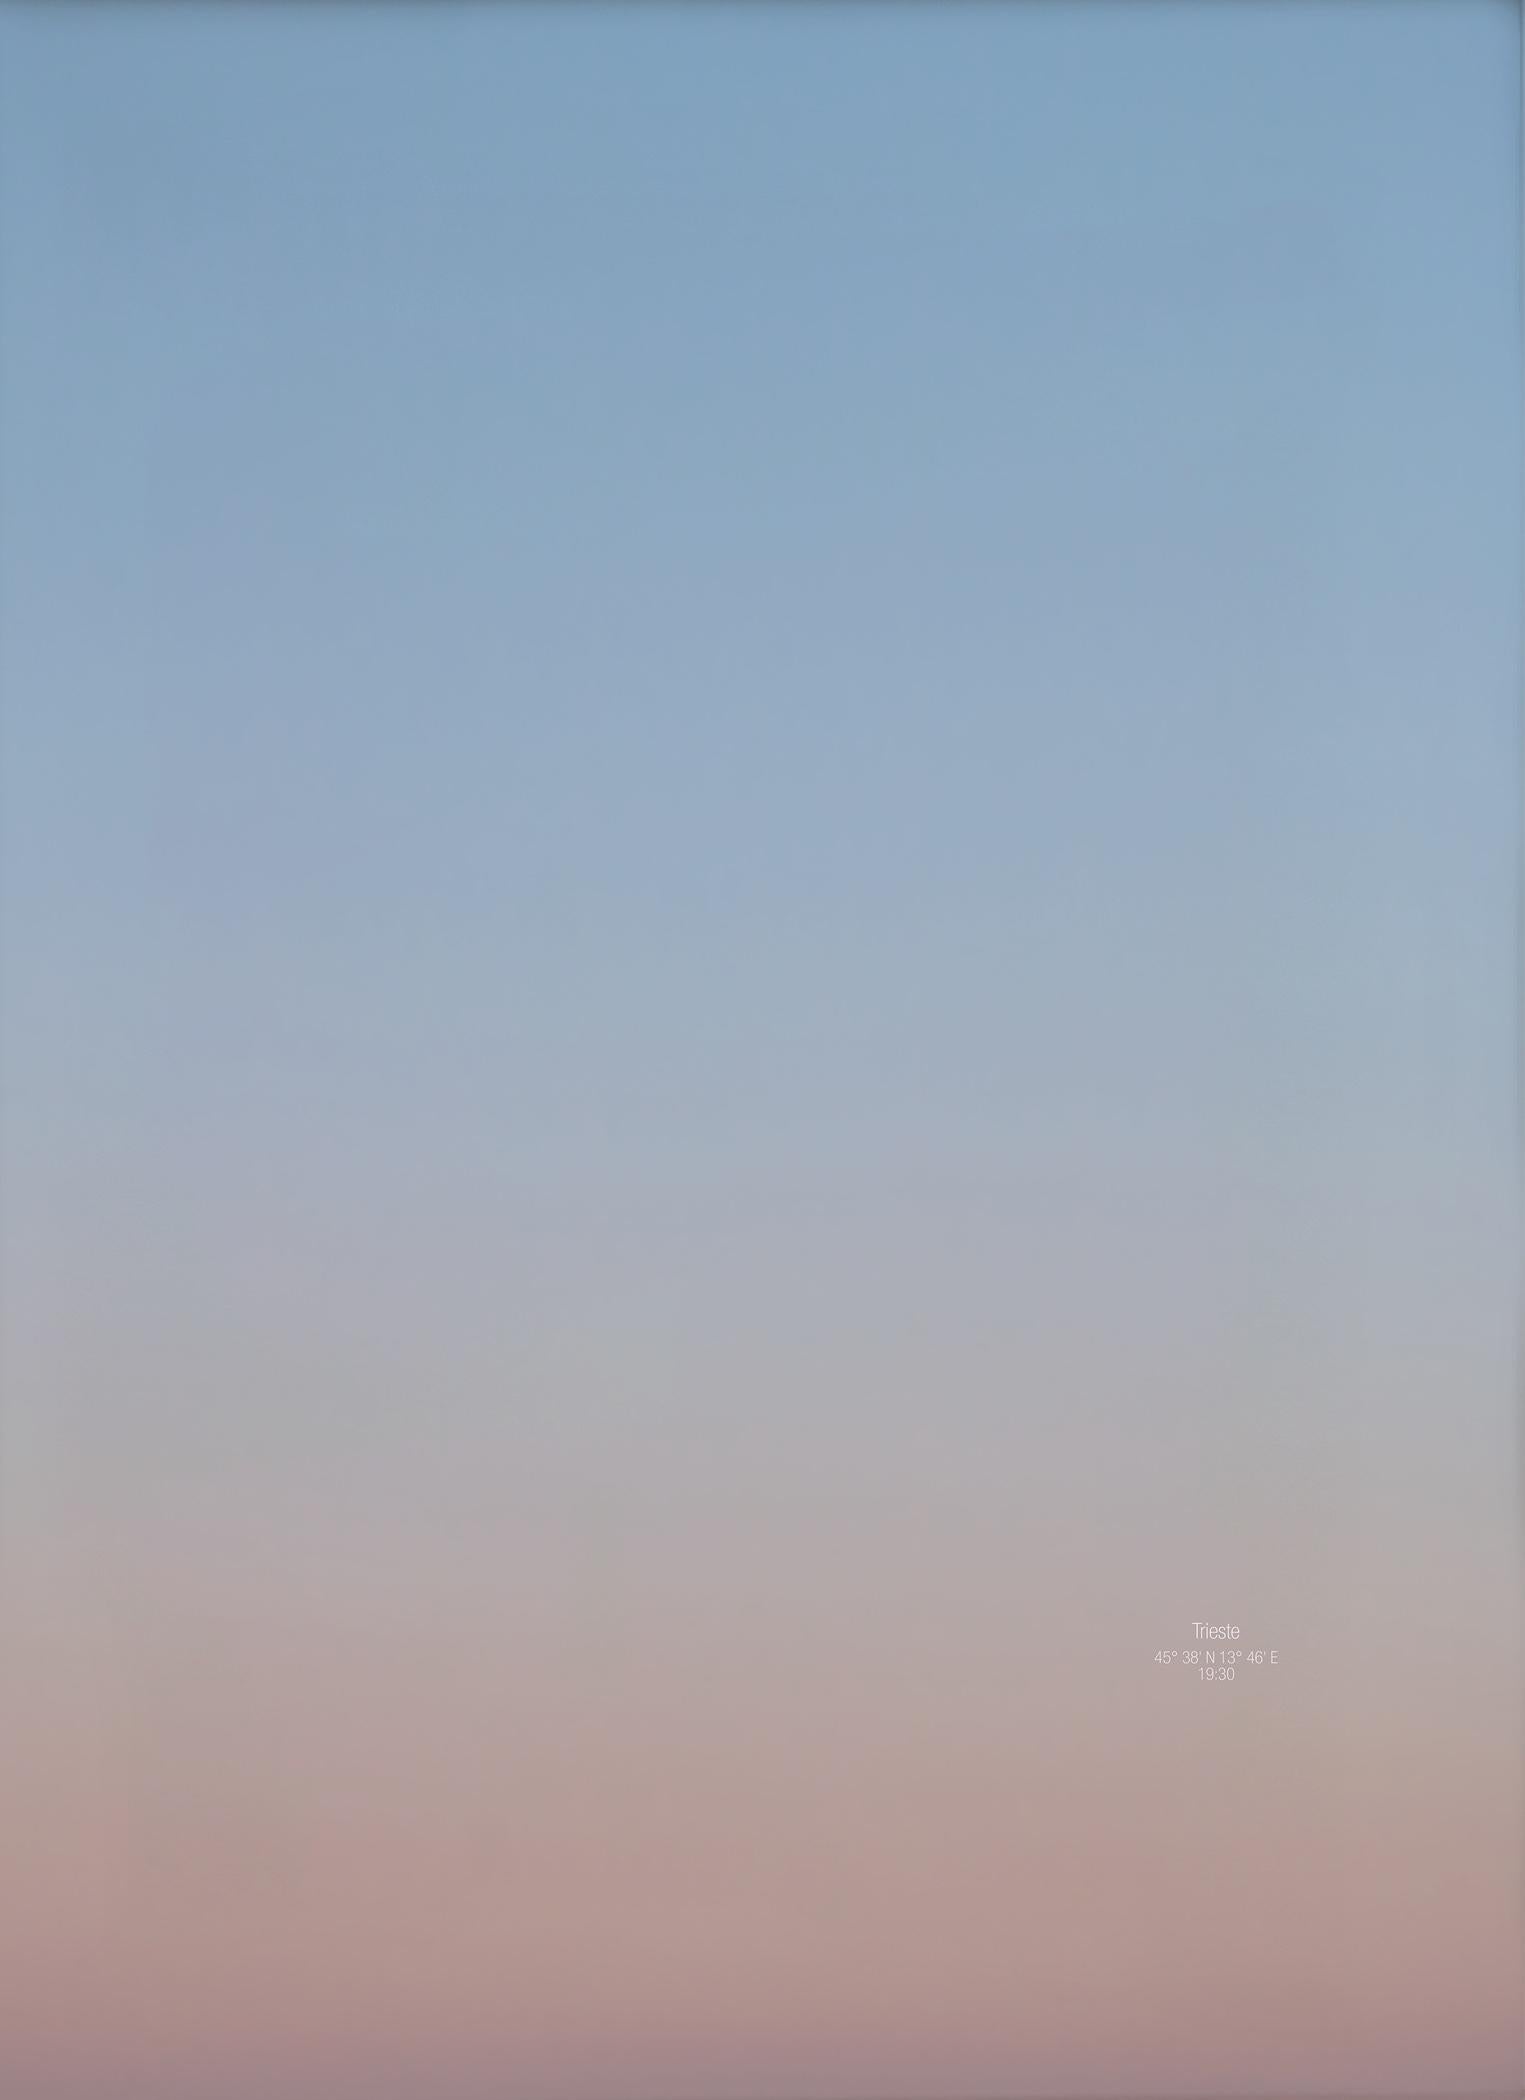 On the other Side of the Sky - 21st Century Abstract Color Photography Sunset
Trieste / Vienna, 19:30
Diptych, 2 pieces, 70 x 50 cm each
Edition 4/5+2 AP
Prints are unframed and come with labels signed by the artist.

When we look at the sky, we see